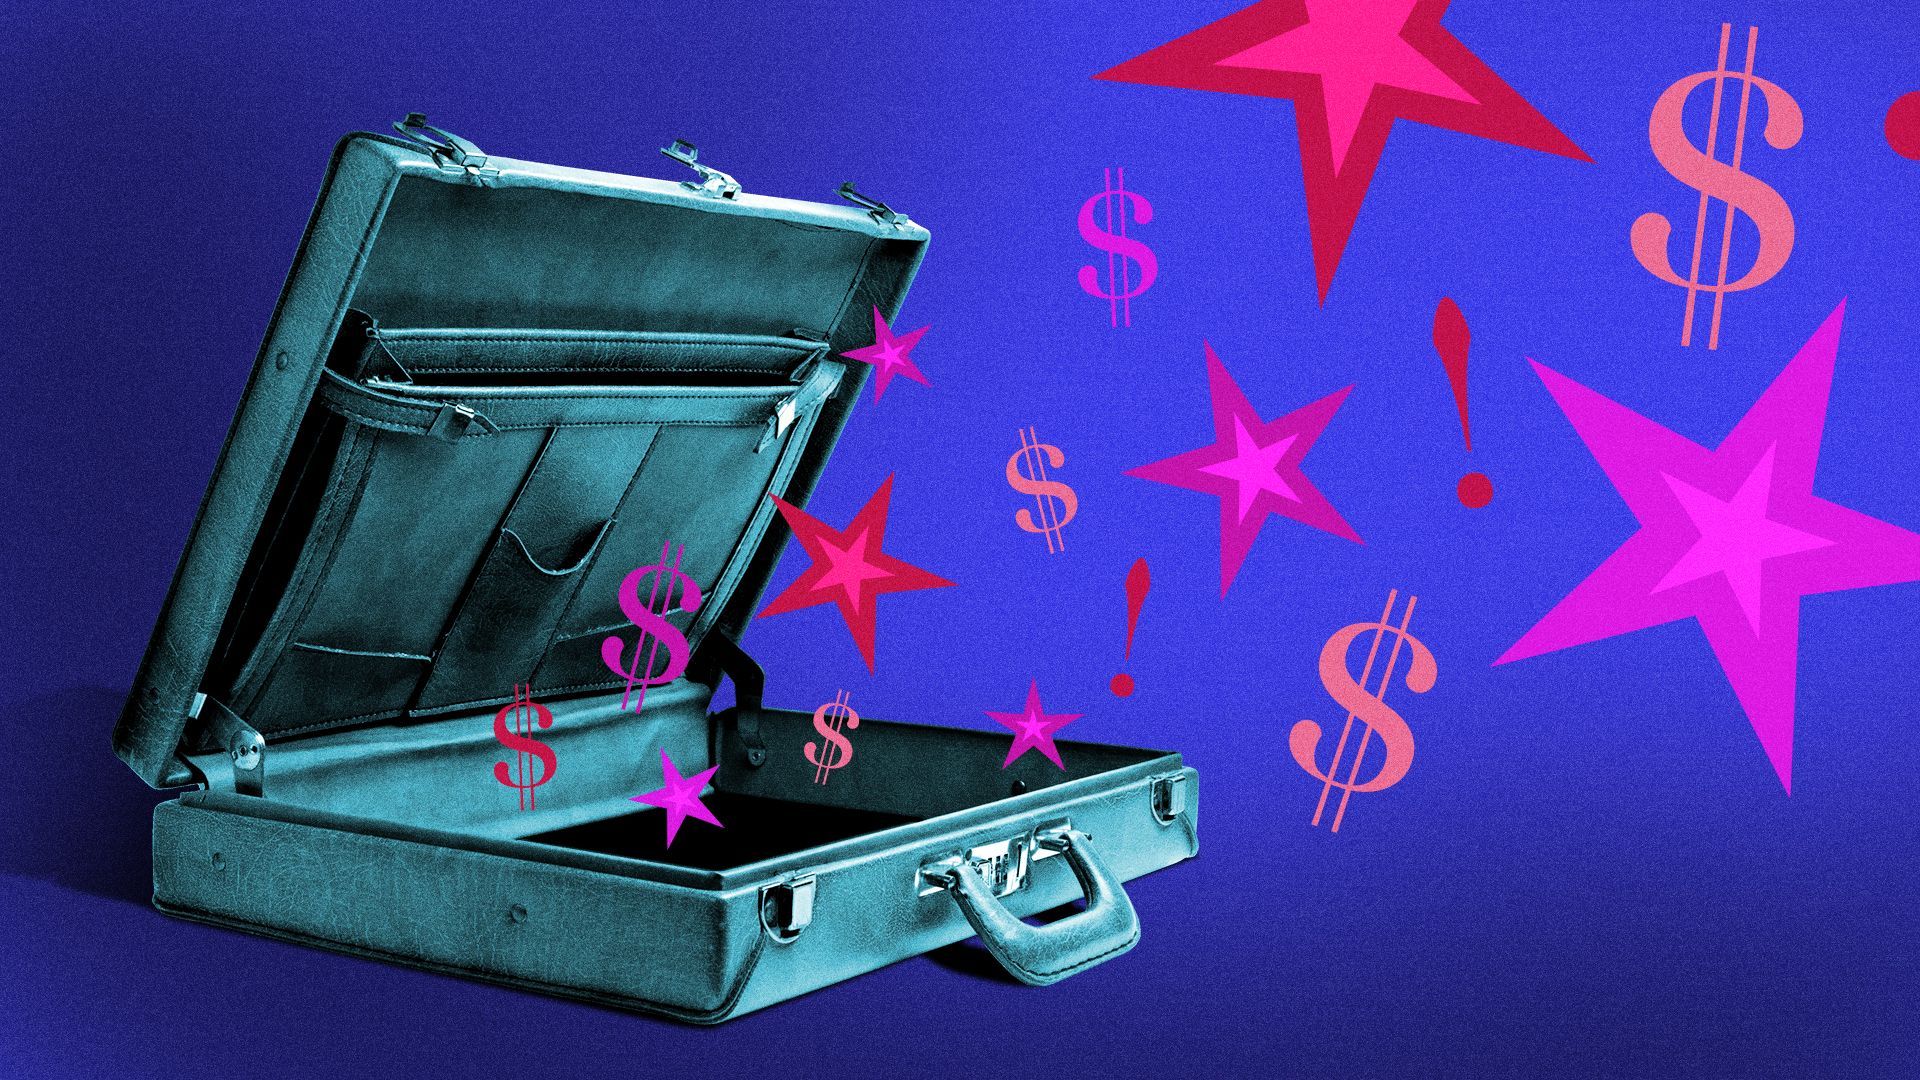 Illustration of stars, dollar signs and exclamation points flying out of an open briefcase.